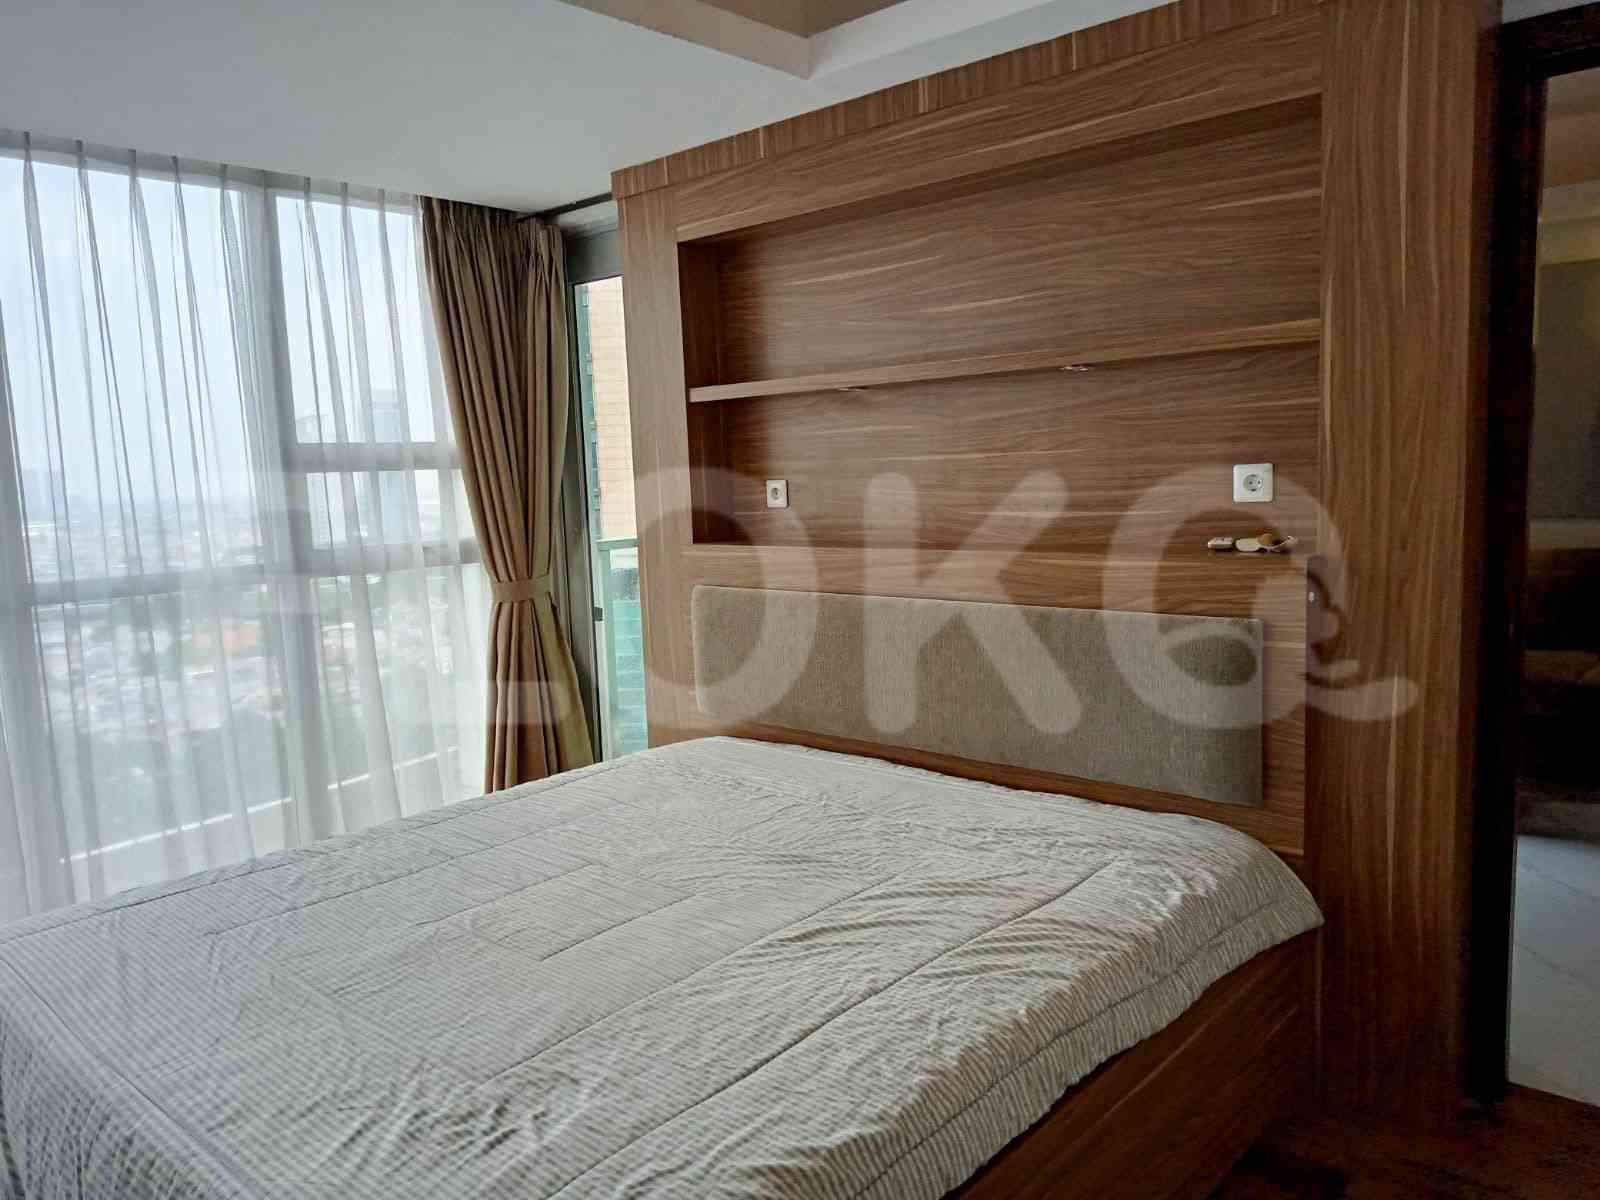 2 Bedroom on 15th Floor for Rent in Kemang Village Residence - fked6c 2